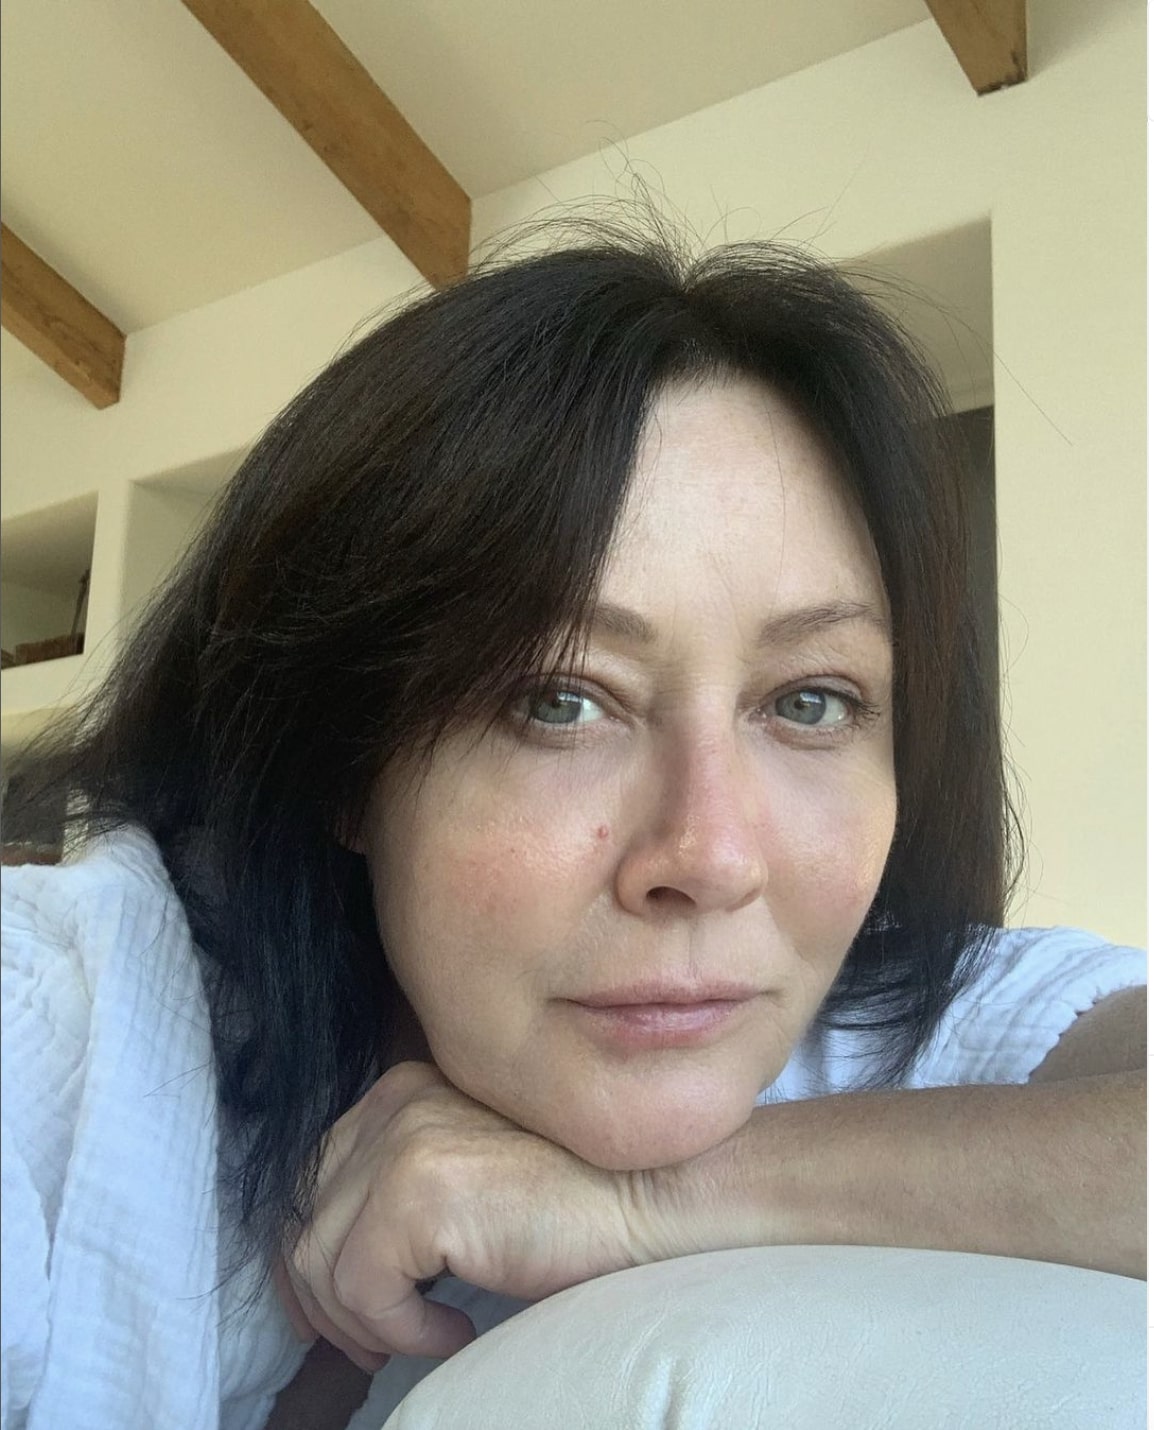 shannen-doherty-found-out-about-ex’s-alleged-affair-before-having-brain-surgery